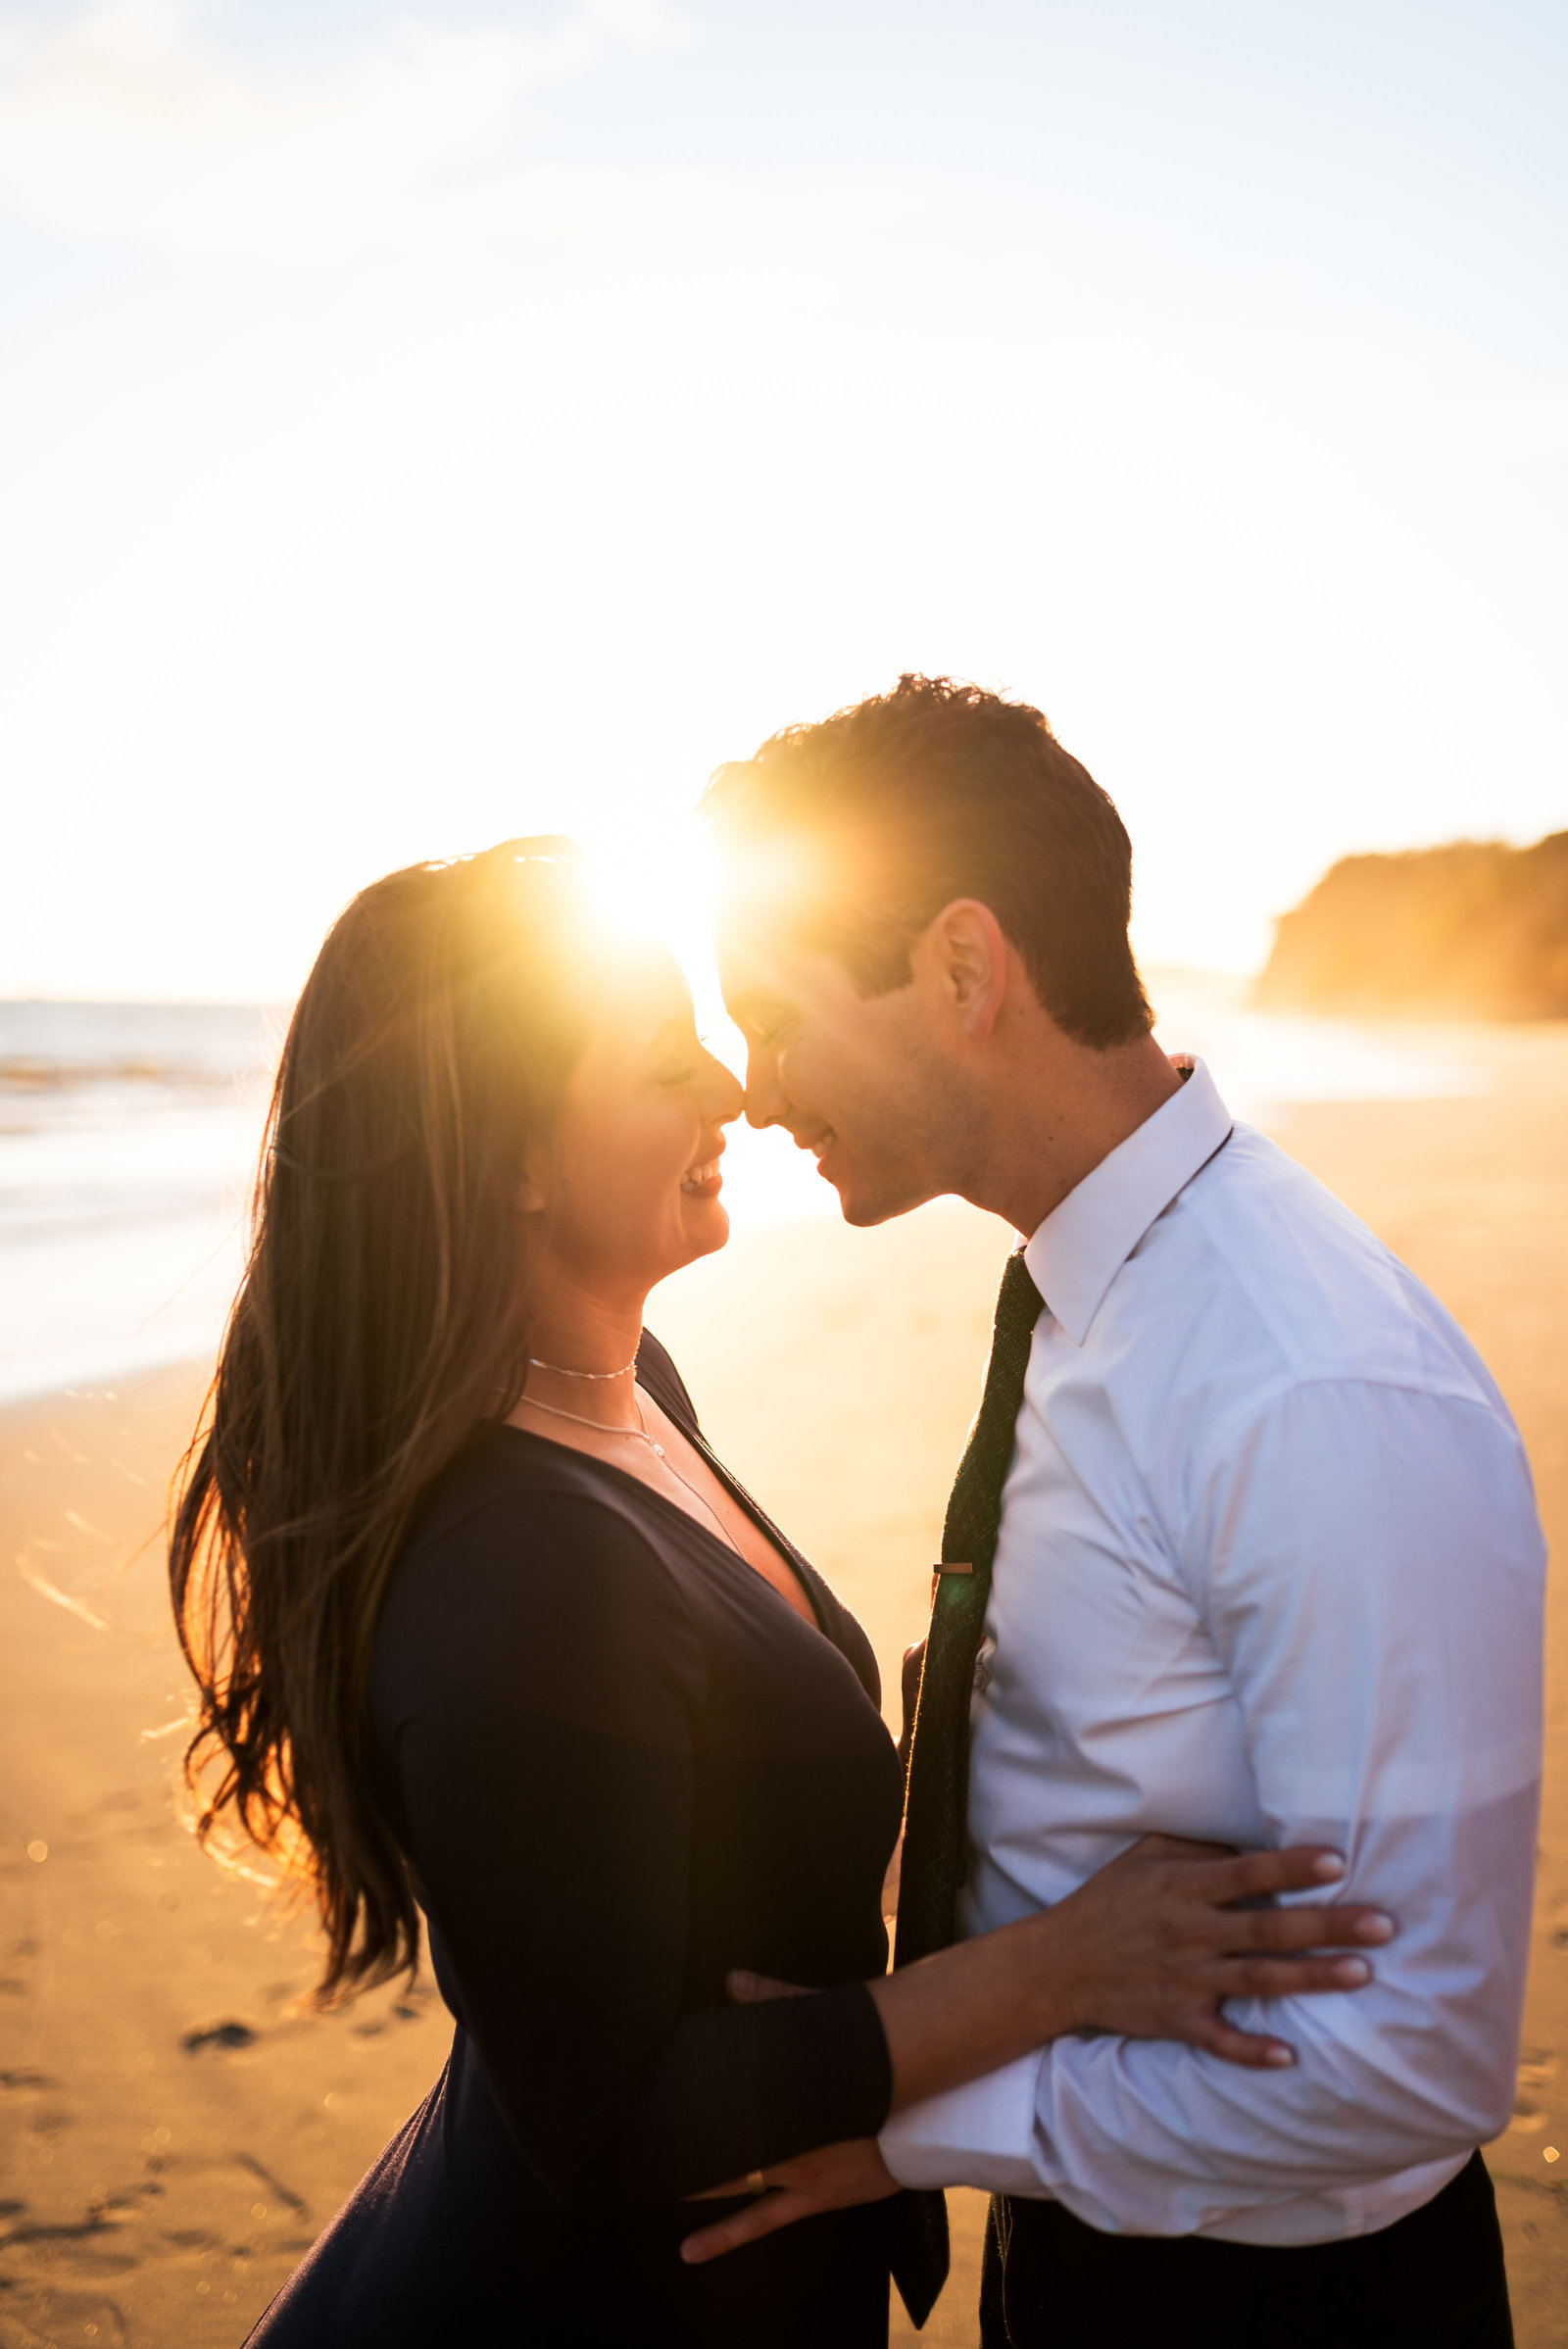 Couple in nice attire touching noses and smiling with eyes closed.